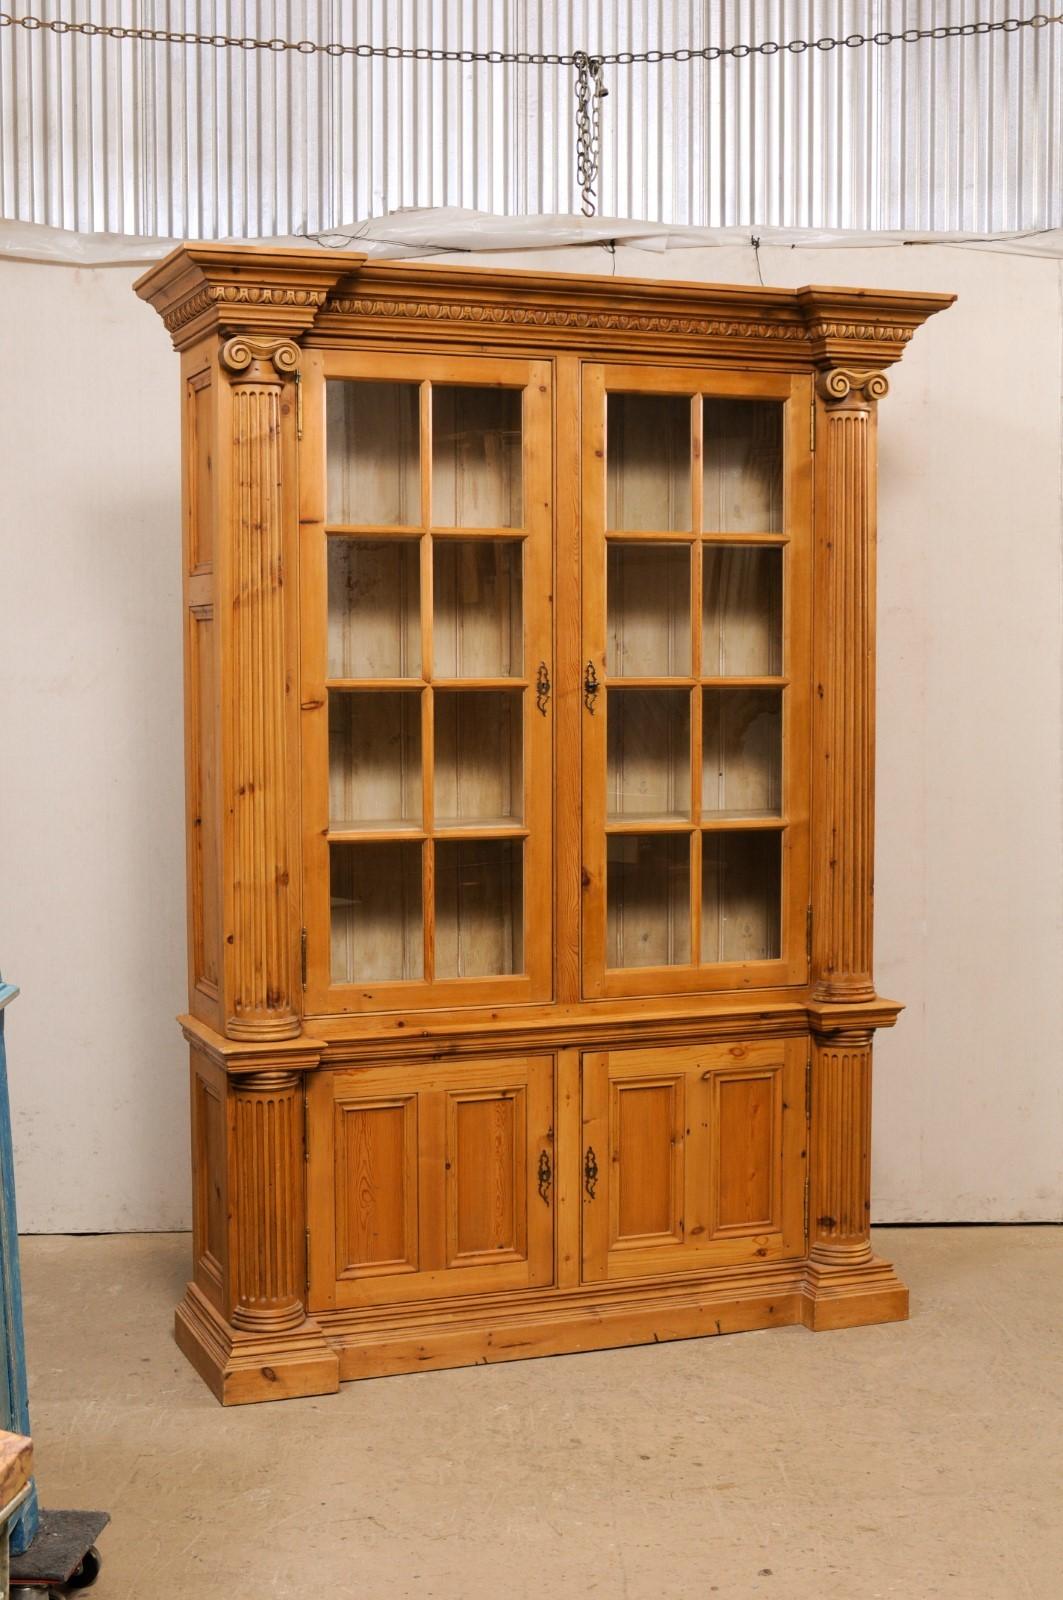 An English nicely-carved and tall wooden display and closed storage cabinet. This vintage cabinet from England is nicely sized, standing approximately 8 feet in height and just shy of 6 feet in length. It is designed with a subtle reversed